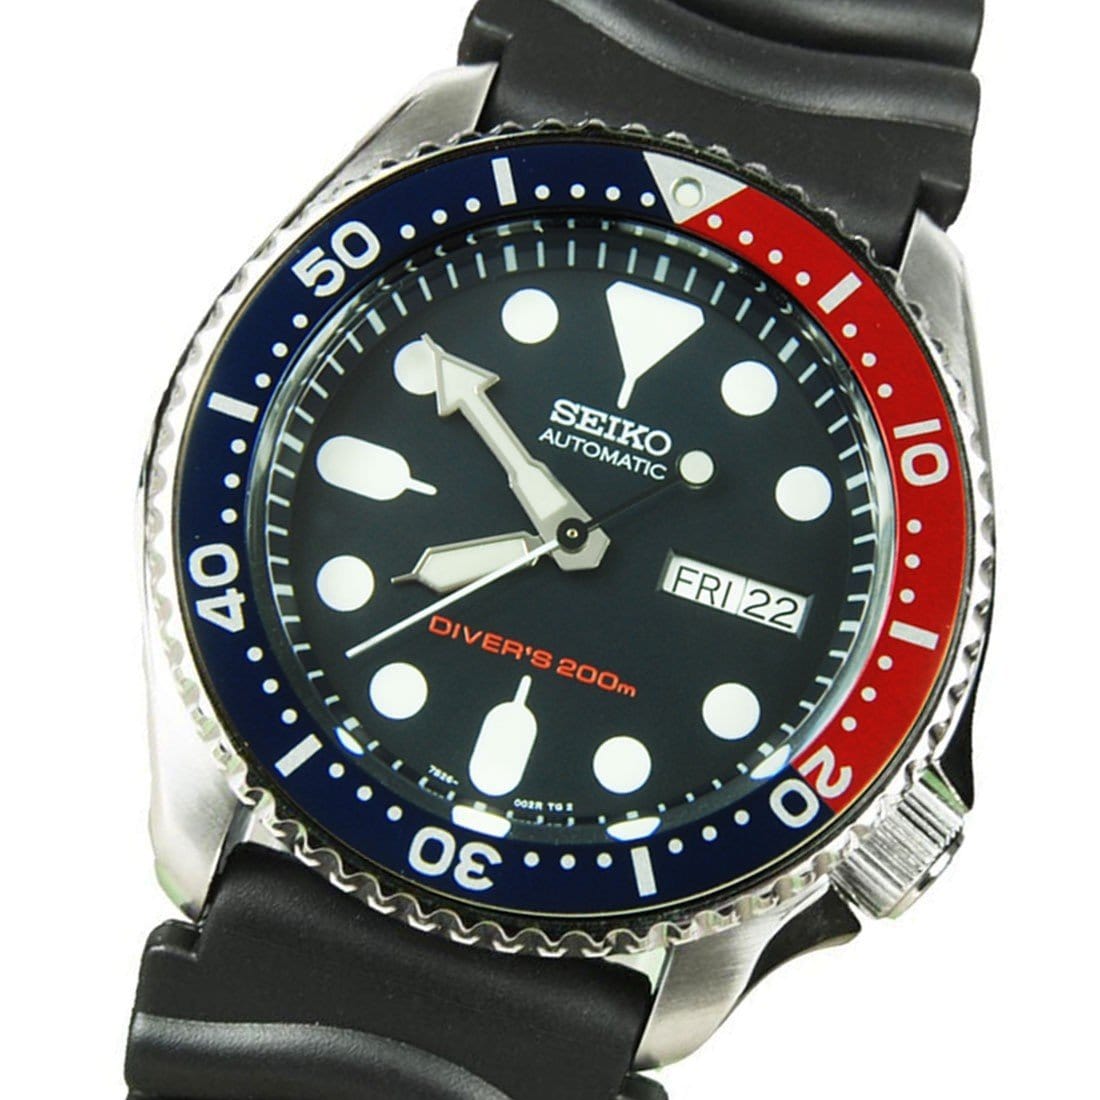 SKX009K1 SKX009K Seiko Automatic Analog Blue Dial Mens Dive Watch with Extra Strap